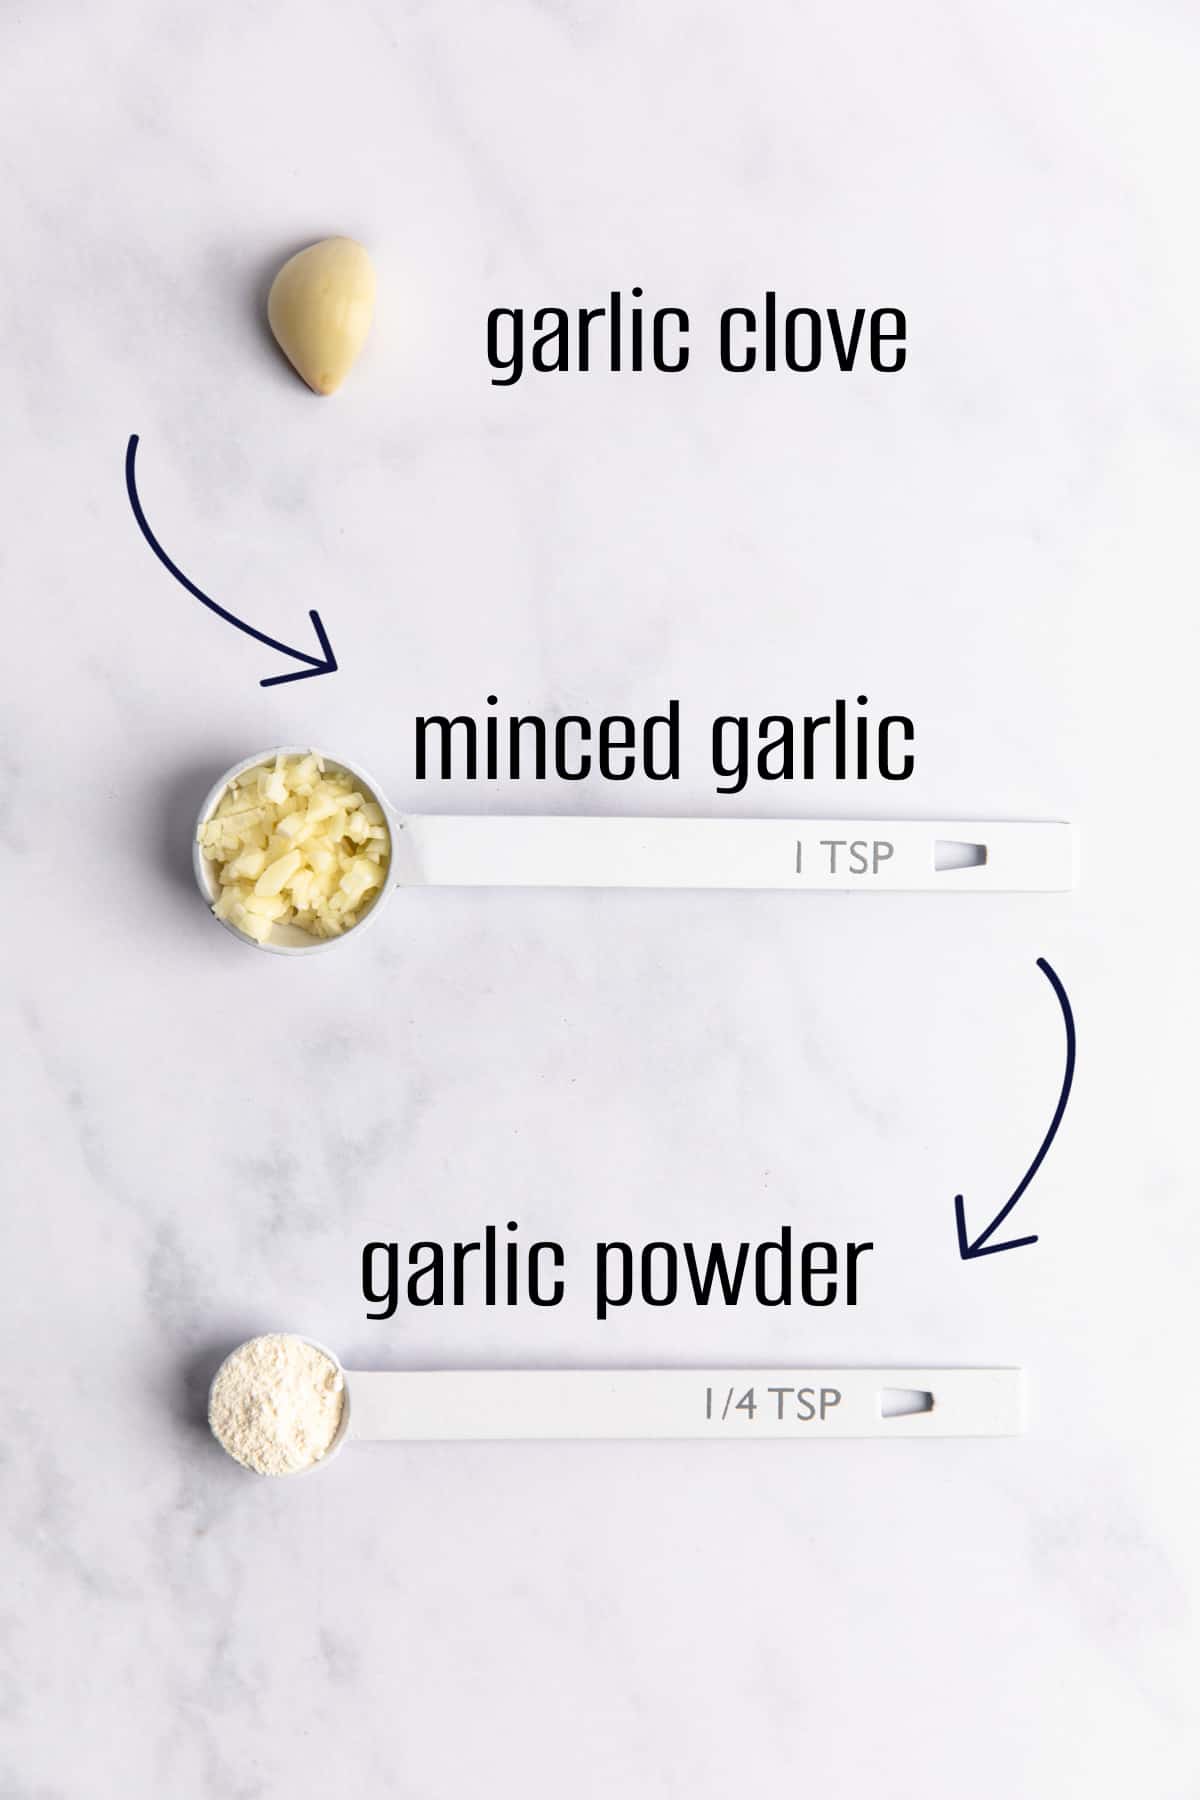 How to substitute one garlic clove for 1 tsp minced garlic and 1/4 tsp of garlic powder.